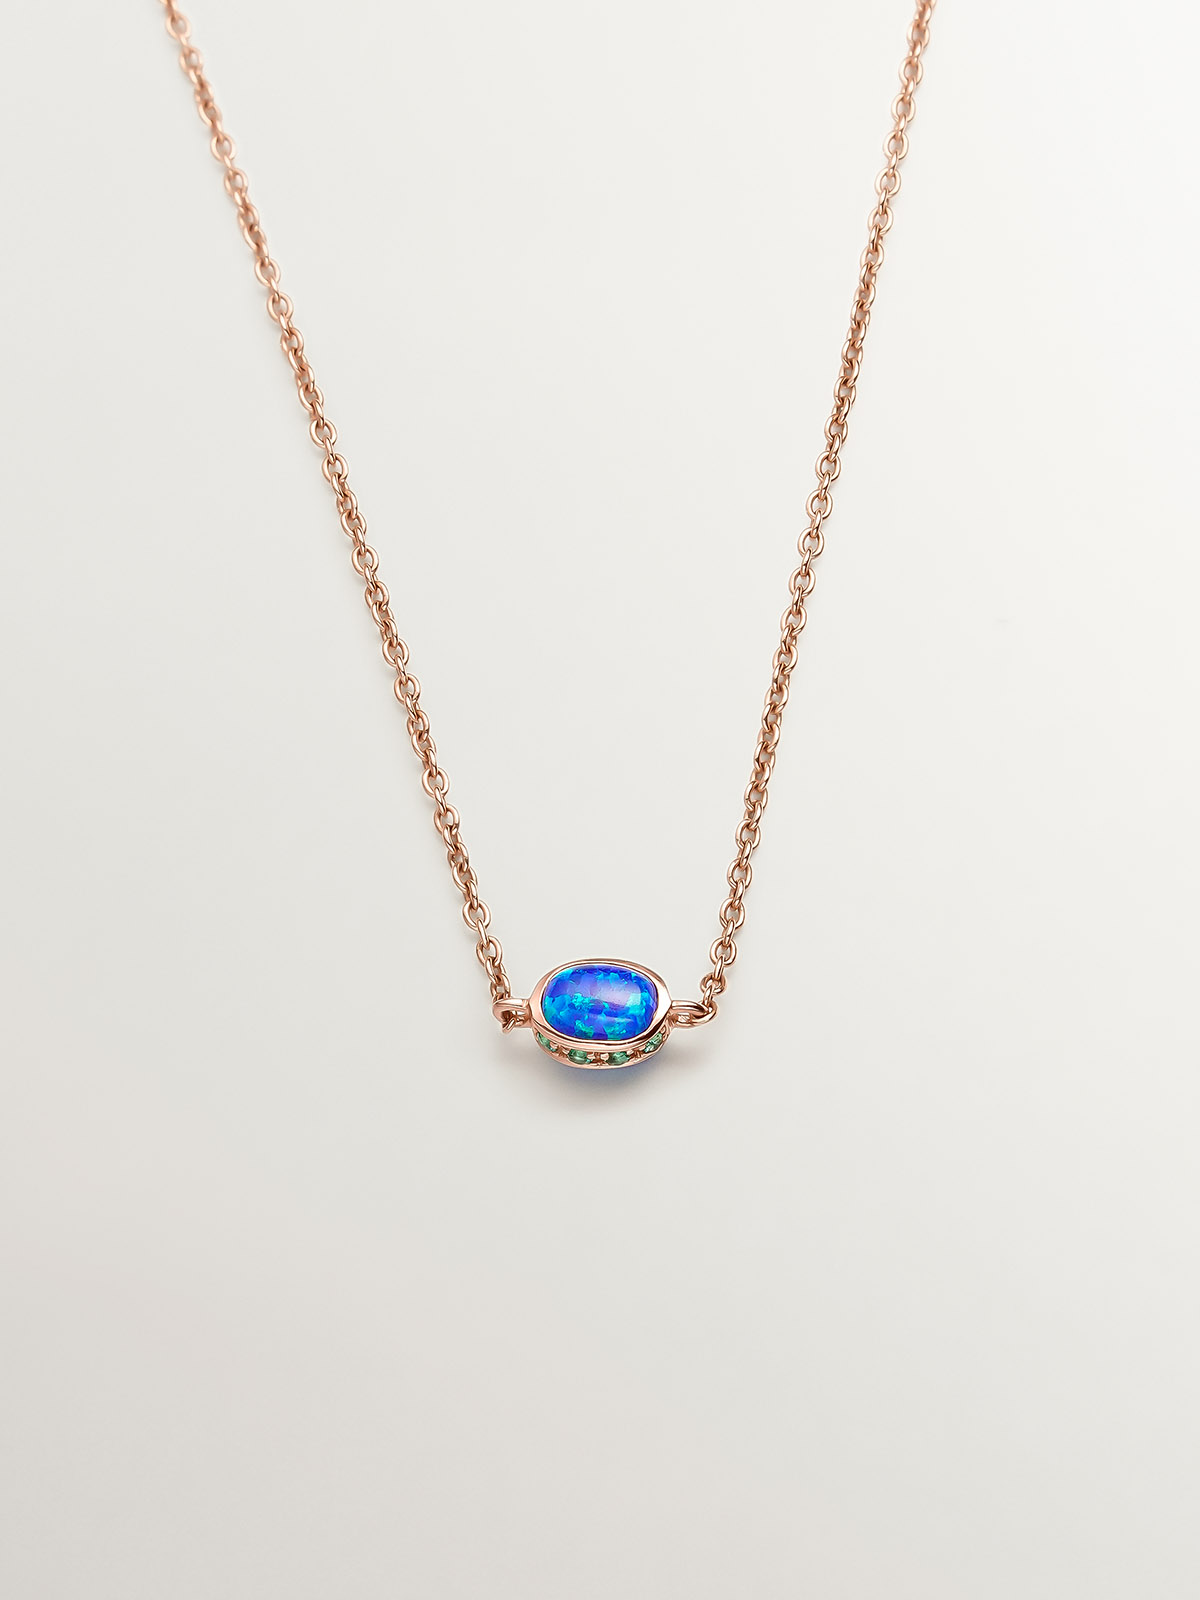 18K rose gold pendant with lab-grown blue opal and emeralds.